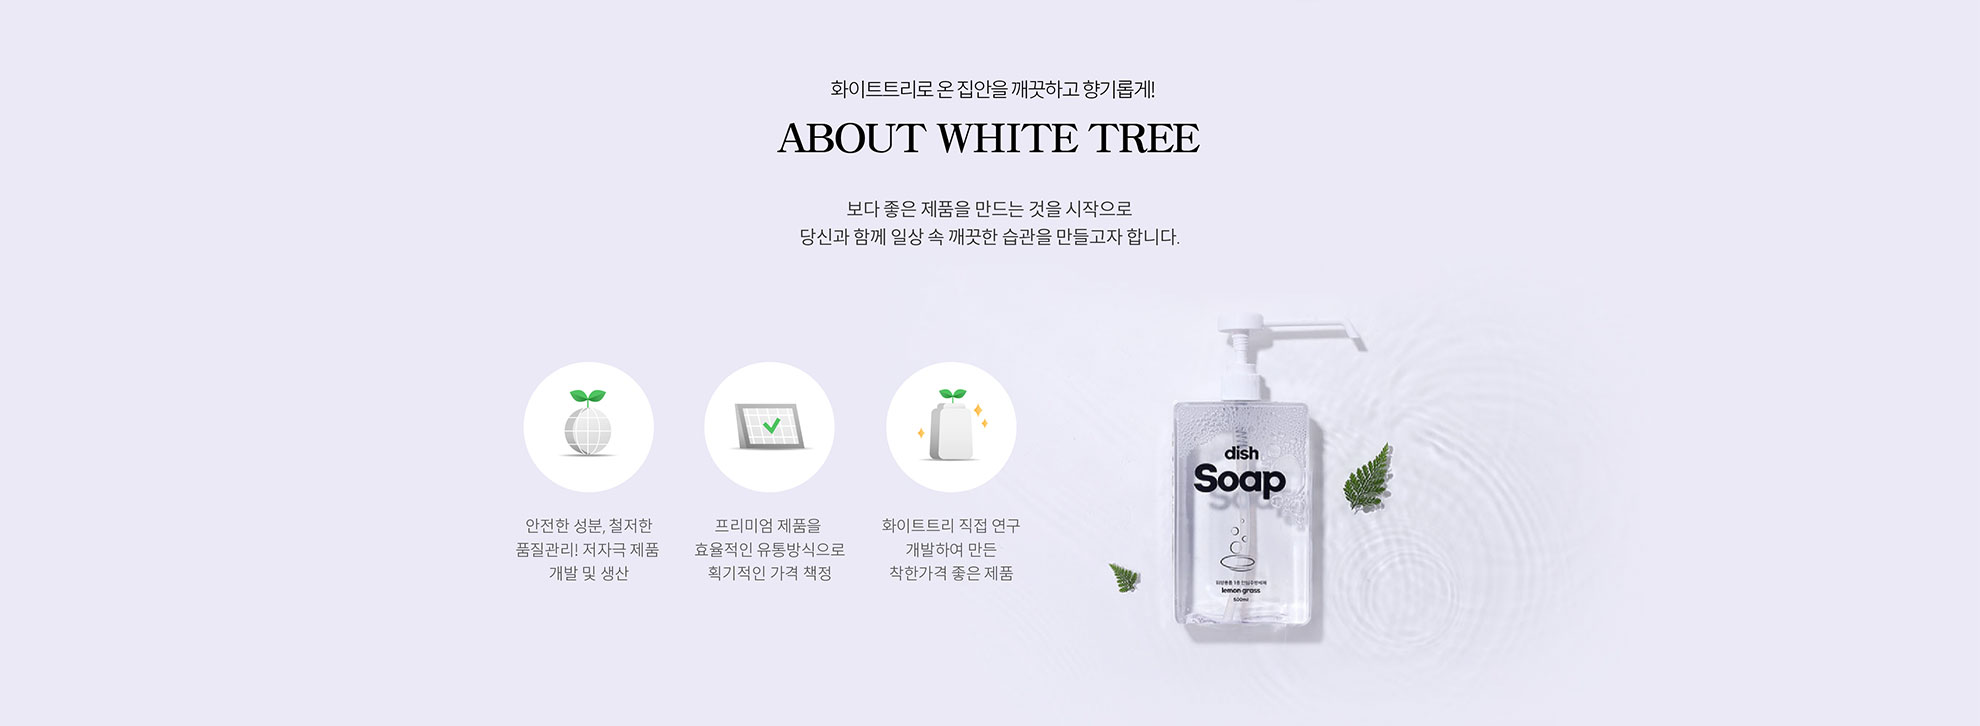 ABOUT WHITE TREE